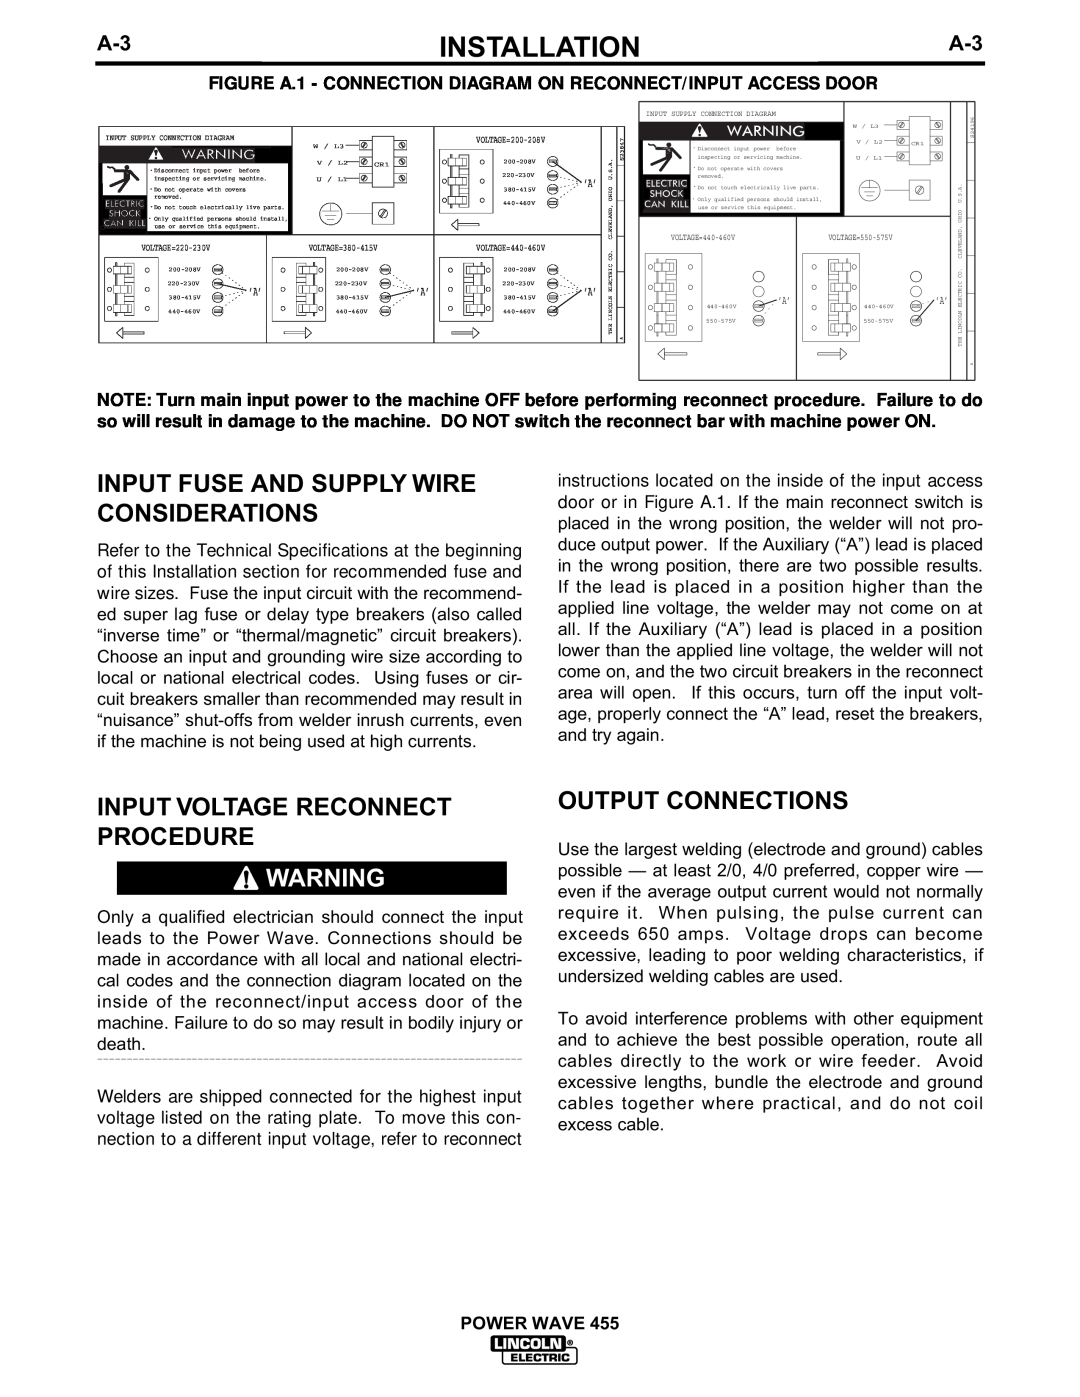 Lincoln Electric IM583-A Input Fuse And Supply Wire Considerations, Input Voltage Reconnect Procedure, Output Connections 